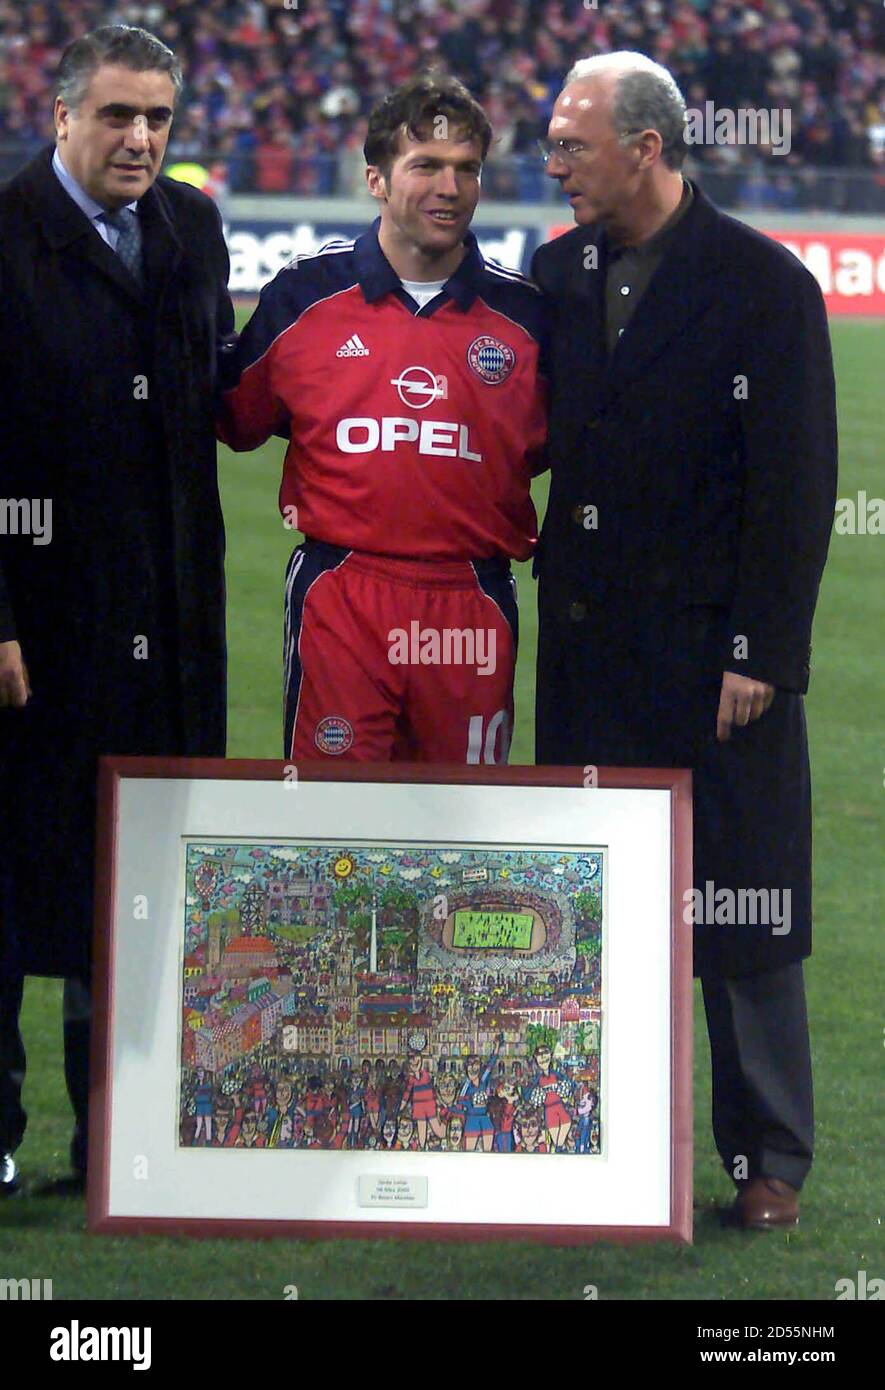 Lothar Matthaeus of Germany's Bayern Munich receives a painting of New Yory artist James Ritzi from Bayern president Franz Beckenbauer (R) and Real Madrid's Lorenzo Saints (L) prior to their Champions League group C match in Munich's Olympic stadium March 8. The match is the last for Matthaeus with Bayern Munich prior to his move to New York on March 10.  KP/ME Stock Photo